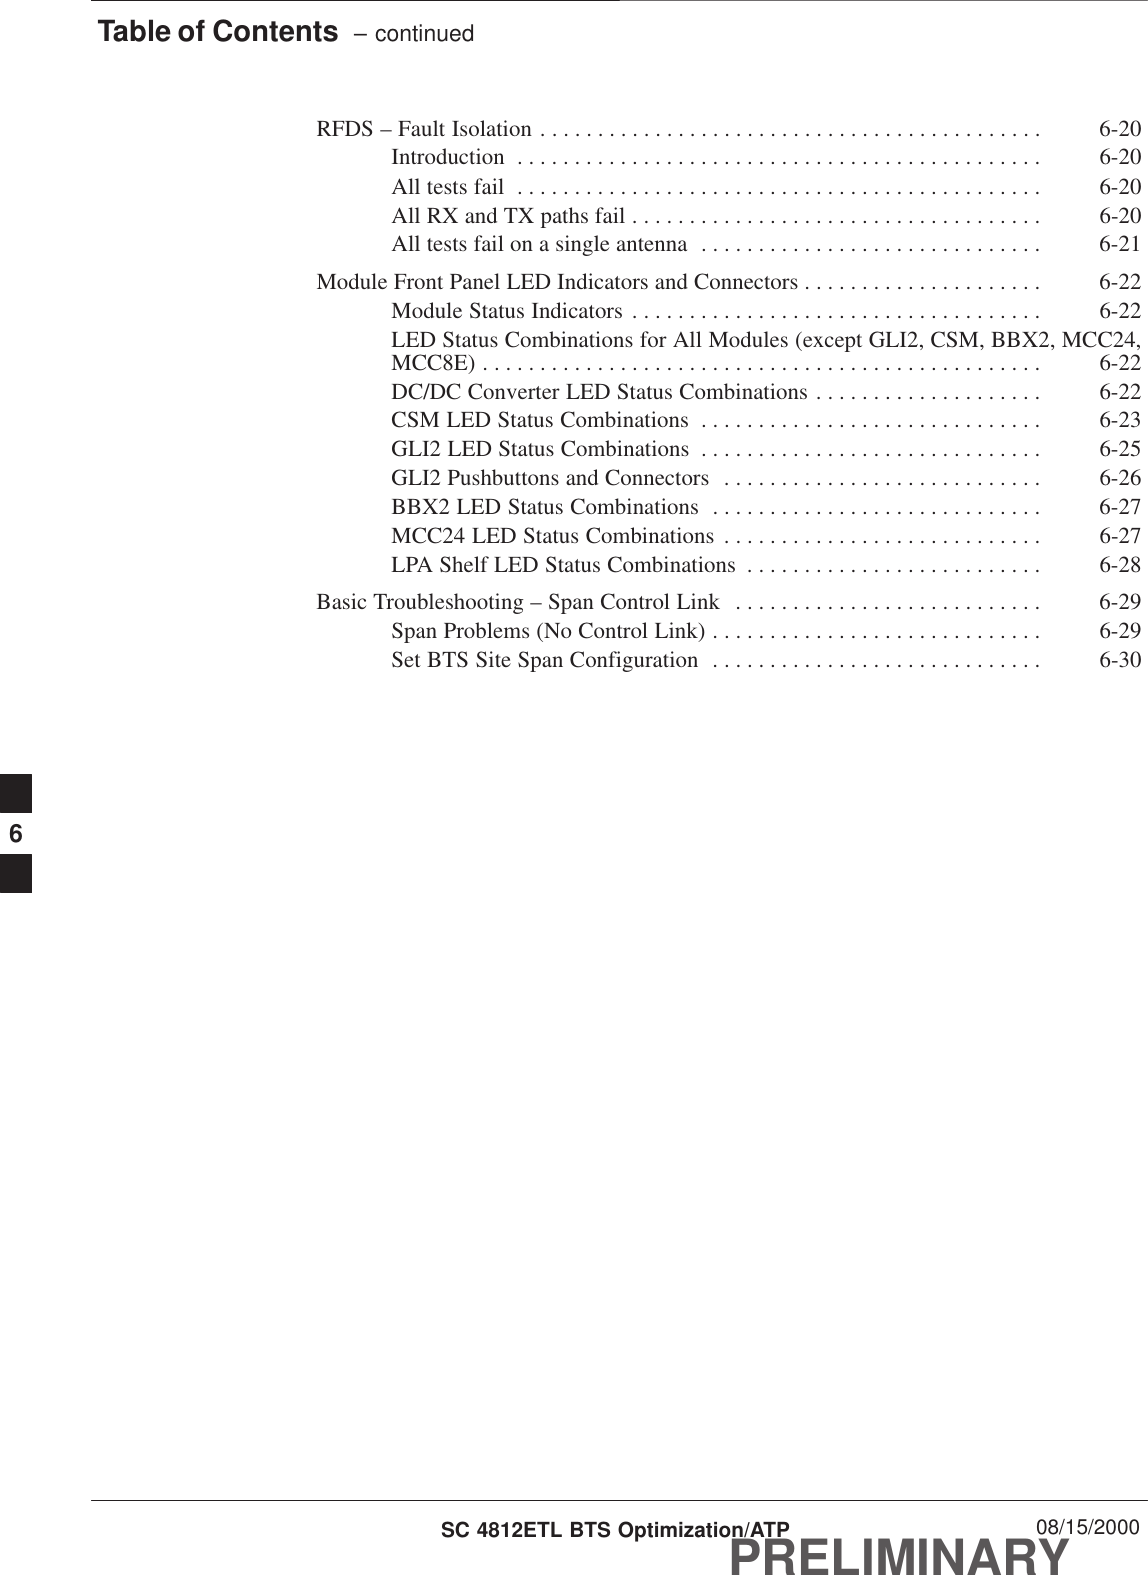 Table of Contents  – continuedPRELIMINARYSC 4812ETL BTS Optimization/ATP 08/15/2000RFDS – Fault Isolation 6-20. . . . . . . . . . . . . . . . . . . . . . . . . . . . . . . . . . . . . . . . . . . . Introduction 6-20. . . . . . . . . . . . . . . . . . . . . . . . . . . . . . . . . . . . . . . . . . . . . . All tests fail 6-20. . . . . . . . . . . . . . . . . . . . . . . . . . . . . . . . . . . . . . . . . . . . . . All RX and TX paths fail 6-20. . . . . . . . . . . . . . . . . . . . . . . . . . . . . . . . . . . . All tests fail on a single antenna 6-21. . . . . . . . . . . . . . . . . . . . . . . . . . . . . . Module Front Panel LED Indicators and Connectors 6-22. . . . . . . . . . . . . . . . . . . . . Module Status Indicators 6-22. . . . . . . . . . . . . . . . . . . . . . . . . . . . . . . . . . . . LED Status Combinations for All Modules (except GLI2, CSM, BBX2, MCC24,MCC8E) 6-22. . . . . . . . . . . . . . . . . . . . . . . . . . . . . . . . . . . . . . . . . . . . . . . . . DC/DC Converter LED Status Combinations 6-22. . . . . . . . . . . . . . . . . . . . CSM LED Status Combinations 6-23. . . . . . . . . . . . . . . . . . . . . . . . . . . . . . GLI2 LED Status Combinations 6-25. . . . . . . . . . . . . . . . . . . . . . . . . . . . . . GLI2 Pushbuttons and Connectors 6-26. . . . . . . . . . . . . . . . . . . . . . . . . . . . BBX2 LED Status Combinations 6-27. . . . . . . . . . . . . . . . . . . . . . . . . . . . . MCC24 LED Status Combinations 6-27. . . . . . . . . . . . . . . . . . . . . . . . . . . . LPA Shelf LED Status Combinations 6-28. . . . . . . . . . . . . . . . . . . . . . . . . . Basic Troubleshooting – Span Control Link 6-29. . . . . . . . . . . . . . . . . . . . . . . . . . . Span Problems (No Control Link) 6-29. . . . . . . . . . . . . . . . . . . . . . . . . . . . . Set BTS Site Span Configuration 6-30. . . . . . . . . . . . . . . . . . . . . . . . . . . . . 6